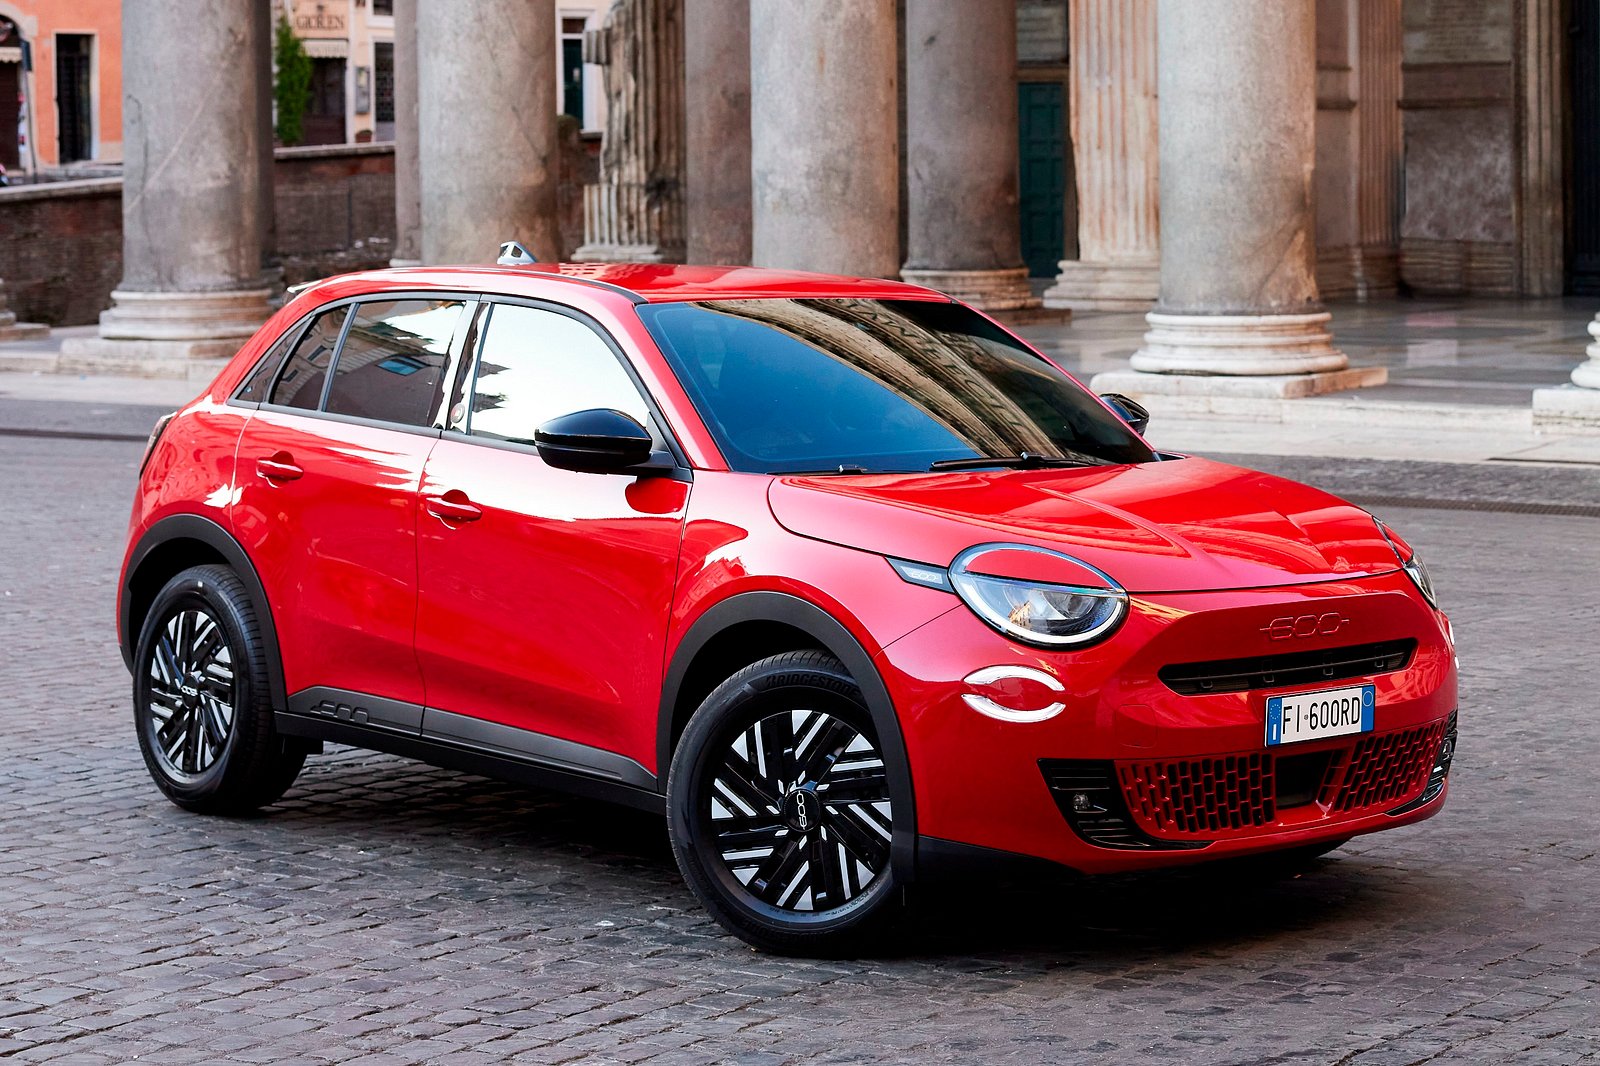 Fiat 600 Revealed In Hybrid And Electric Forms